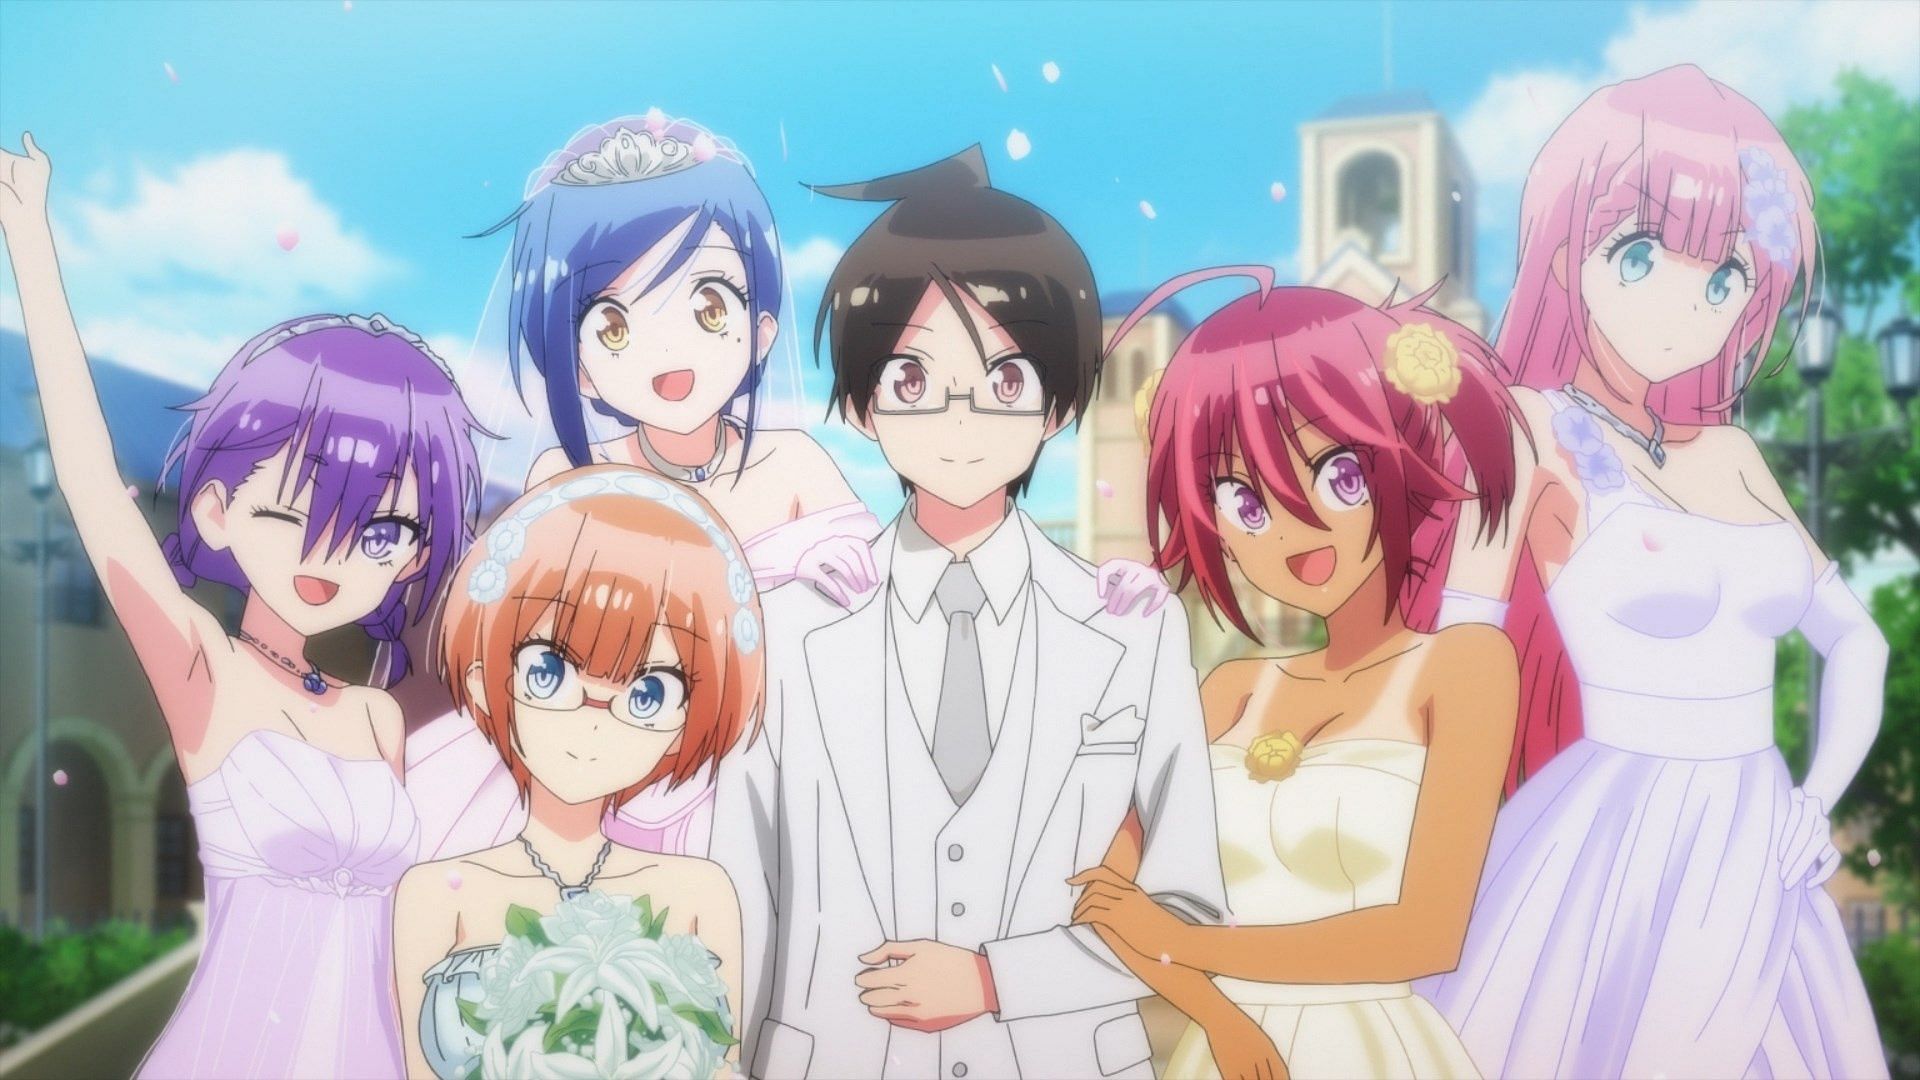 A still from the romance anime series featuring the main characters (Image via Silver and Arvo Animation)